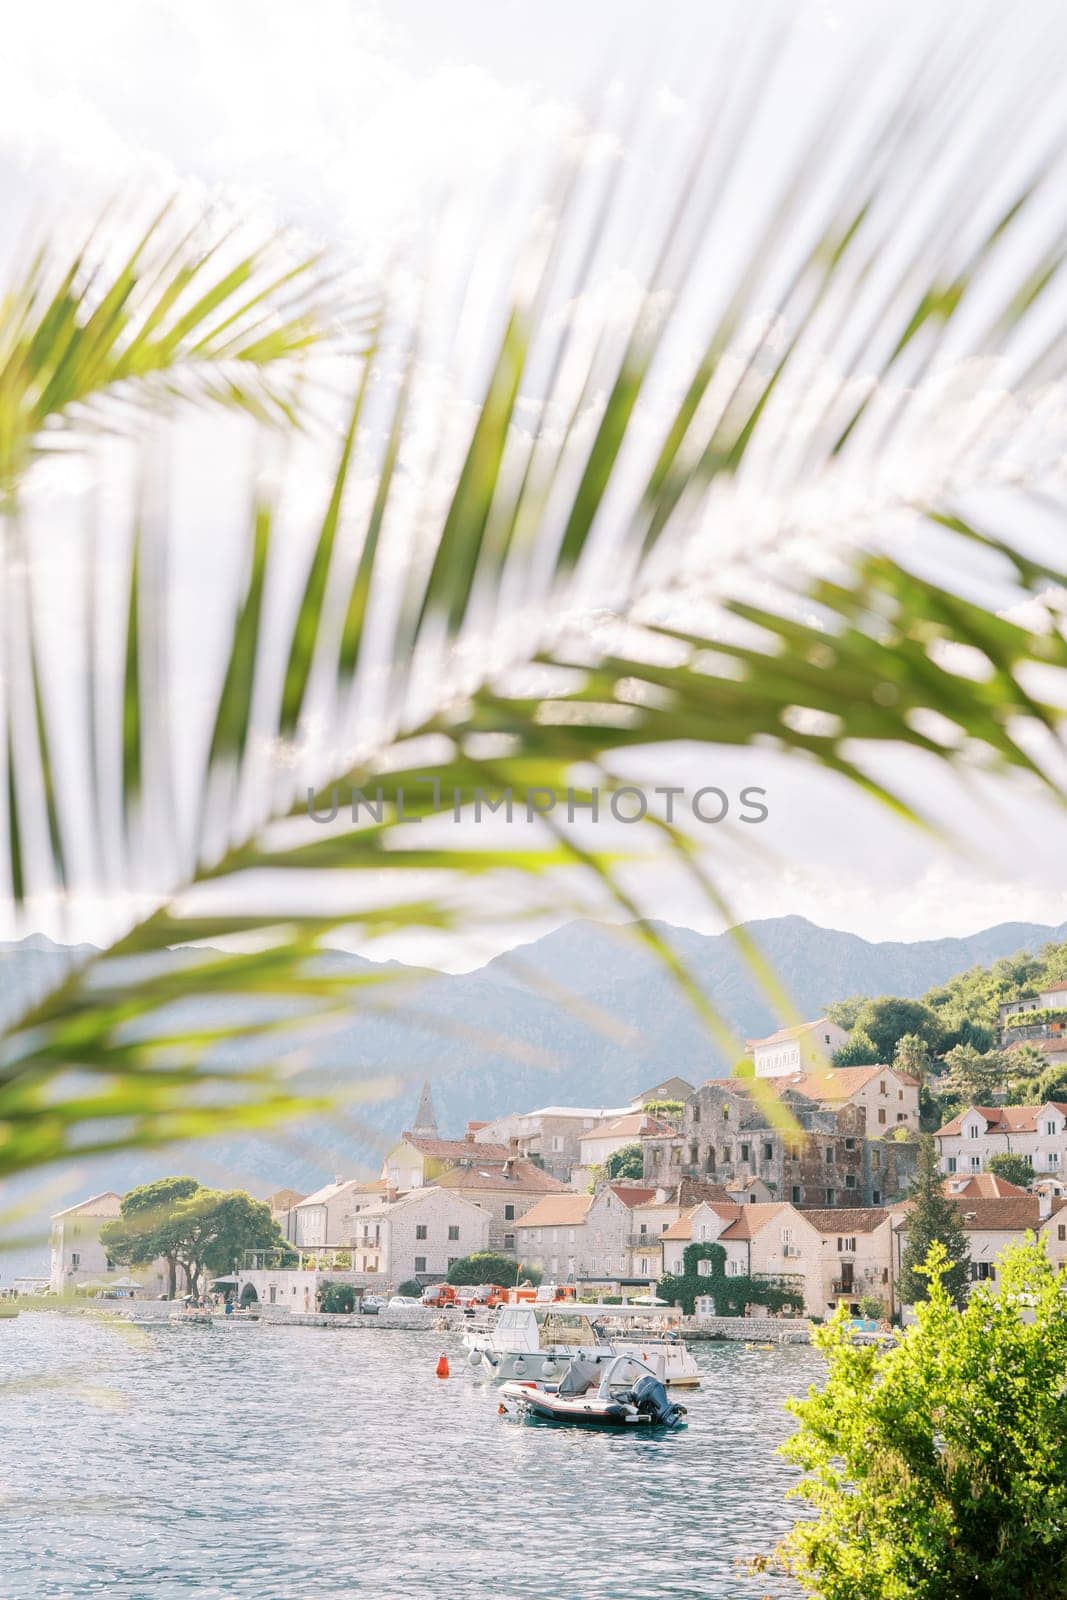 View through palm branches of boats standing off the coast of Perast. Montenegro. High quality photo